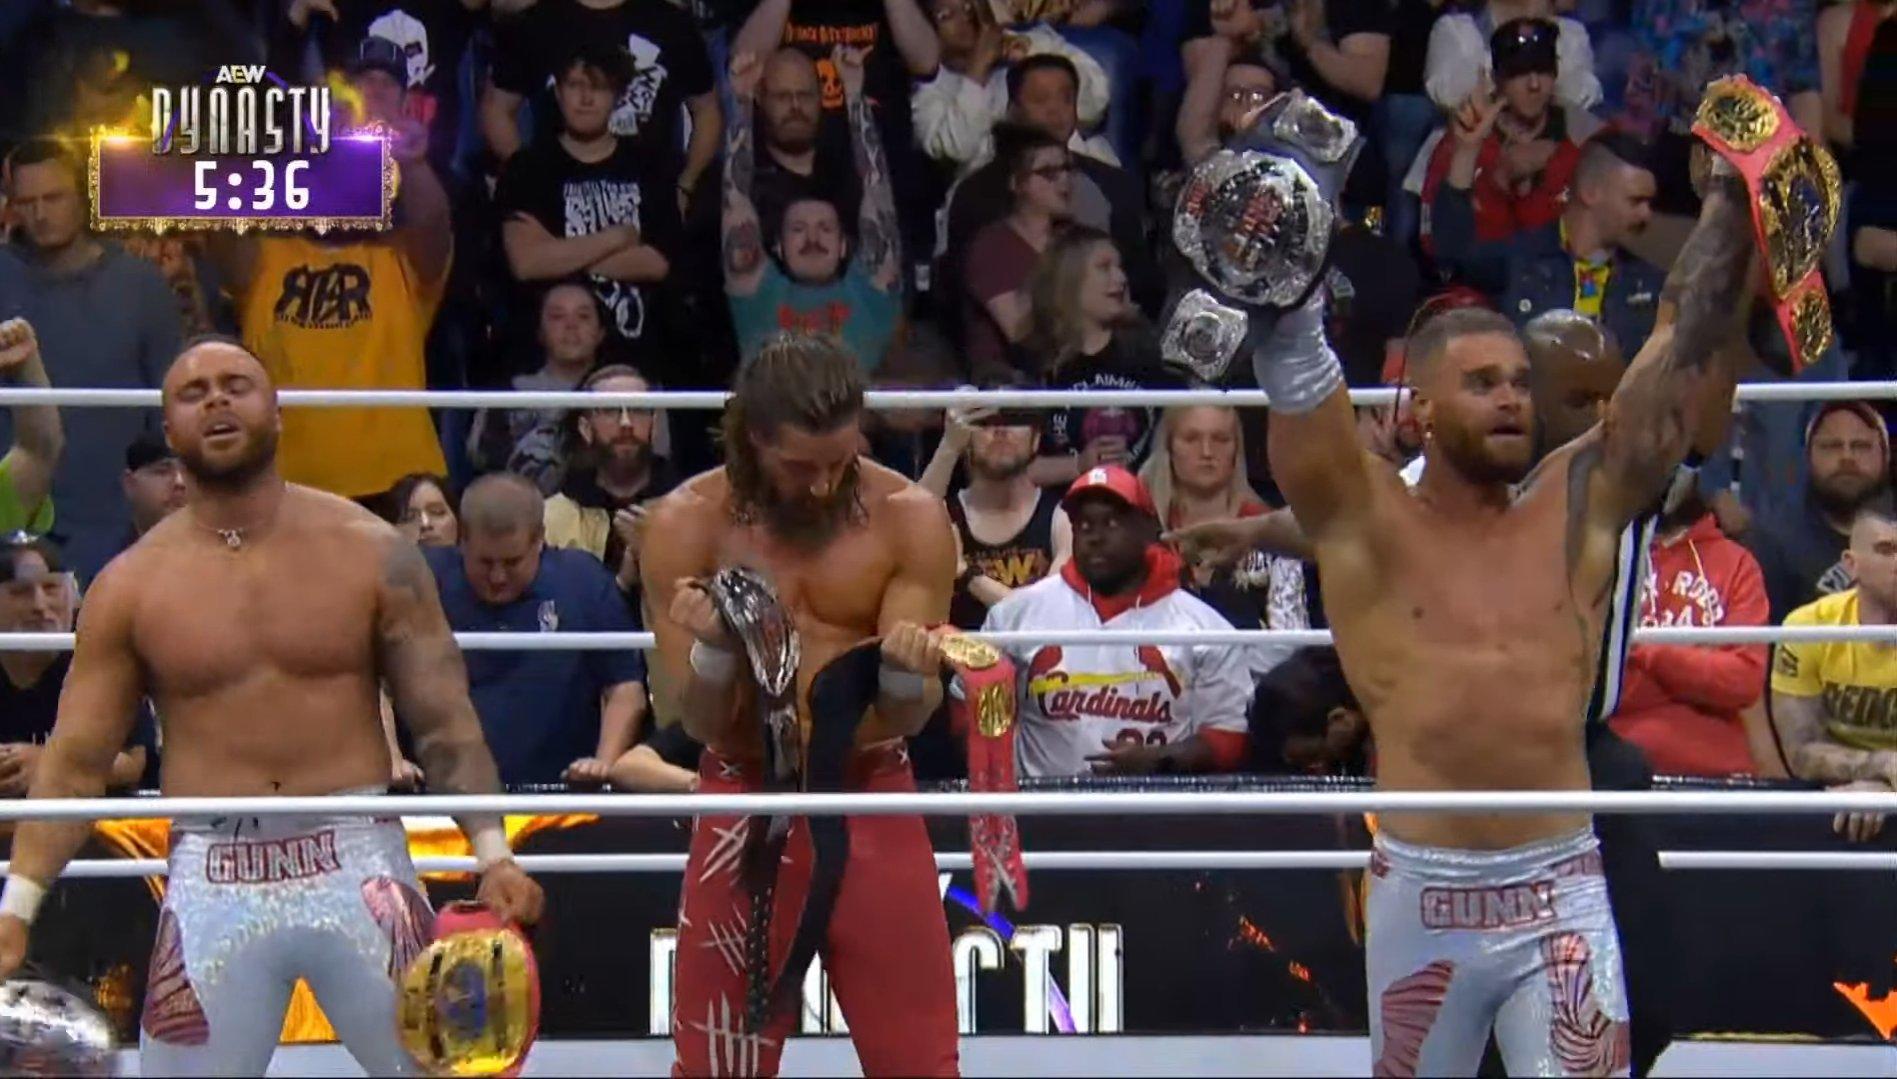 Bullet Club Gold Become the Inaugural Unified World Trios Champions at AEW Dynasty